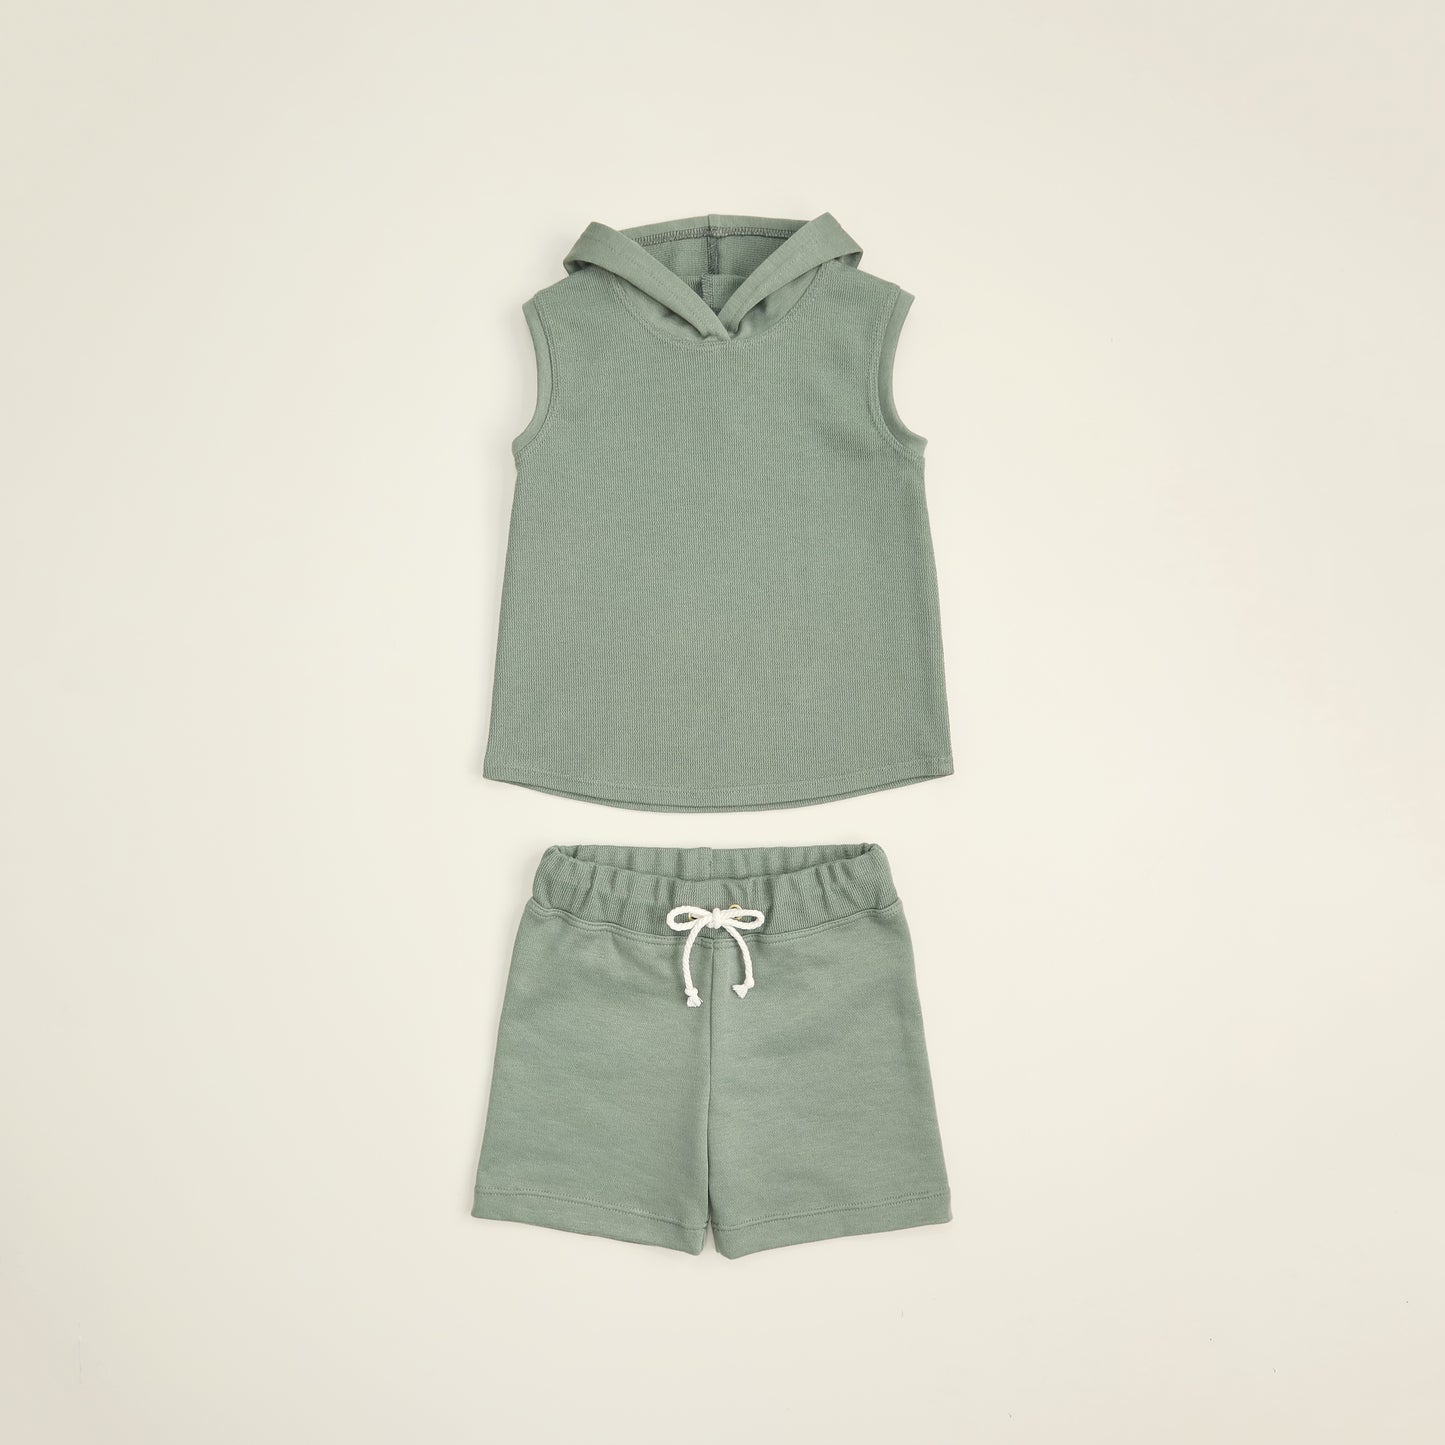 The Ridley Tank Top and Shorts Set